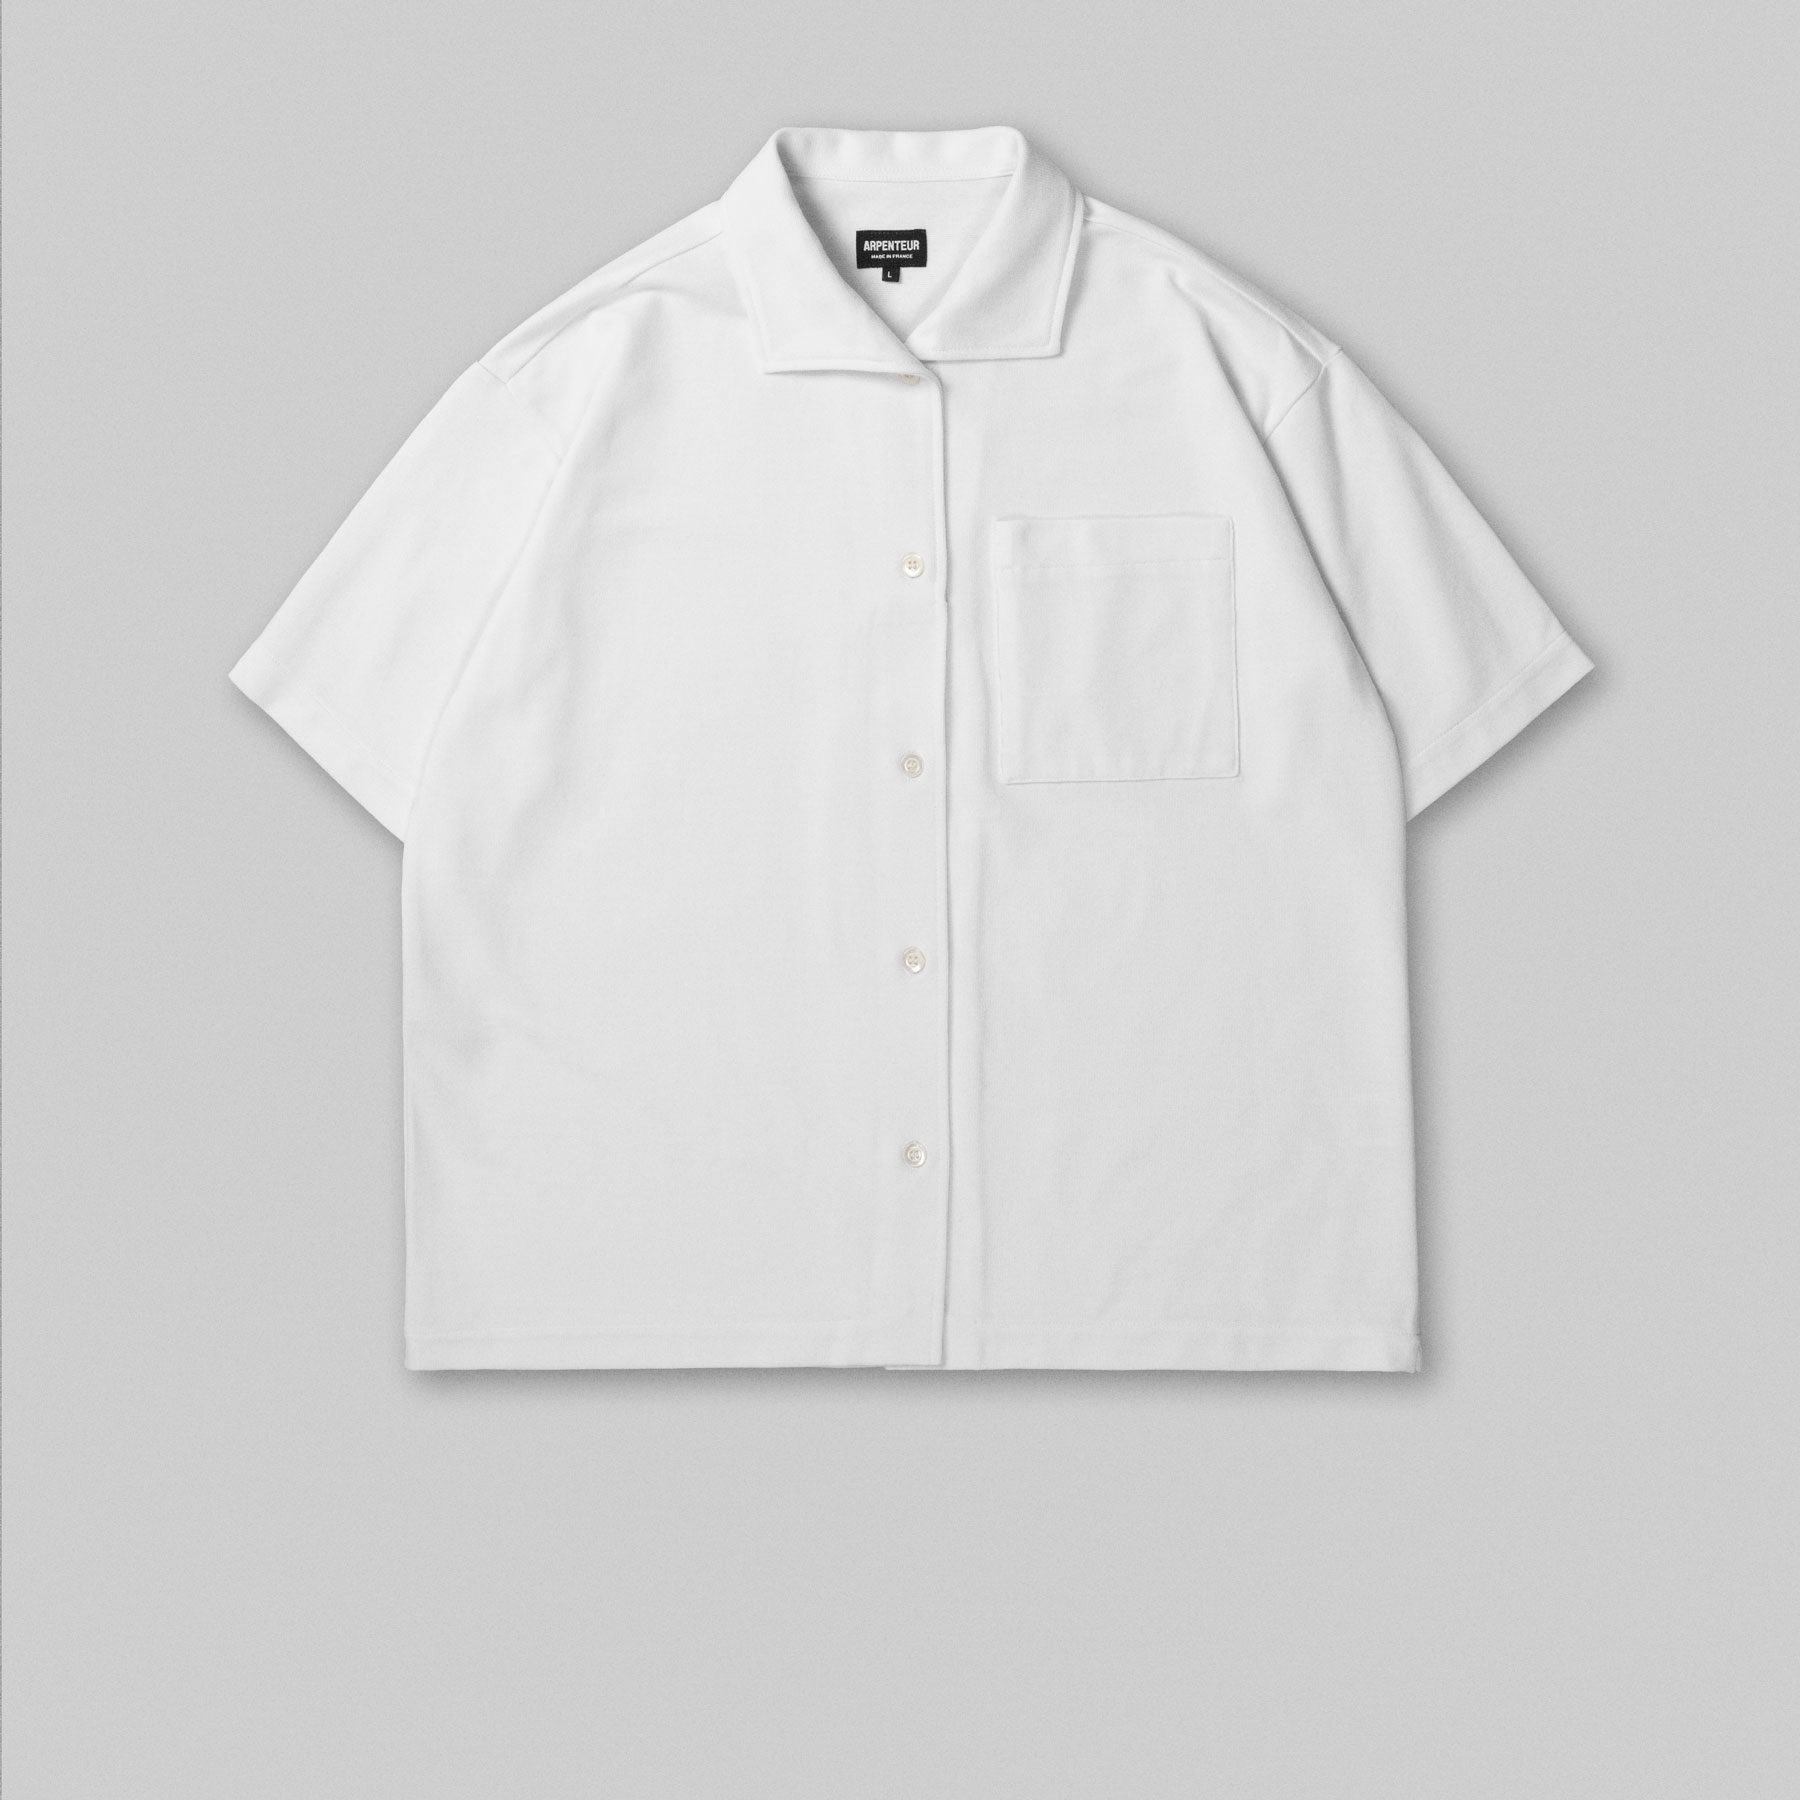 CORAL short sleeve shirt by Arpenteur in White color